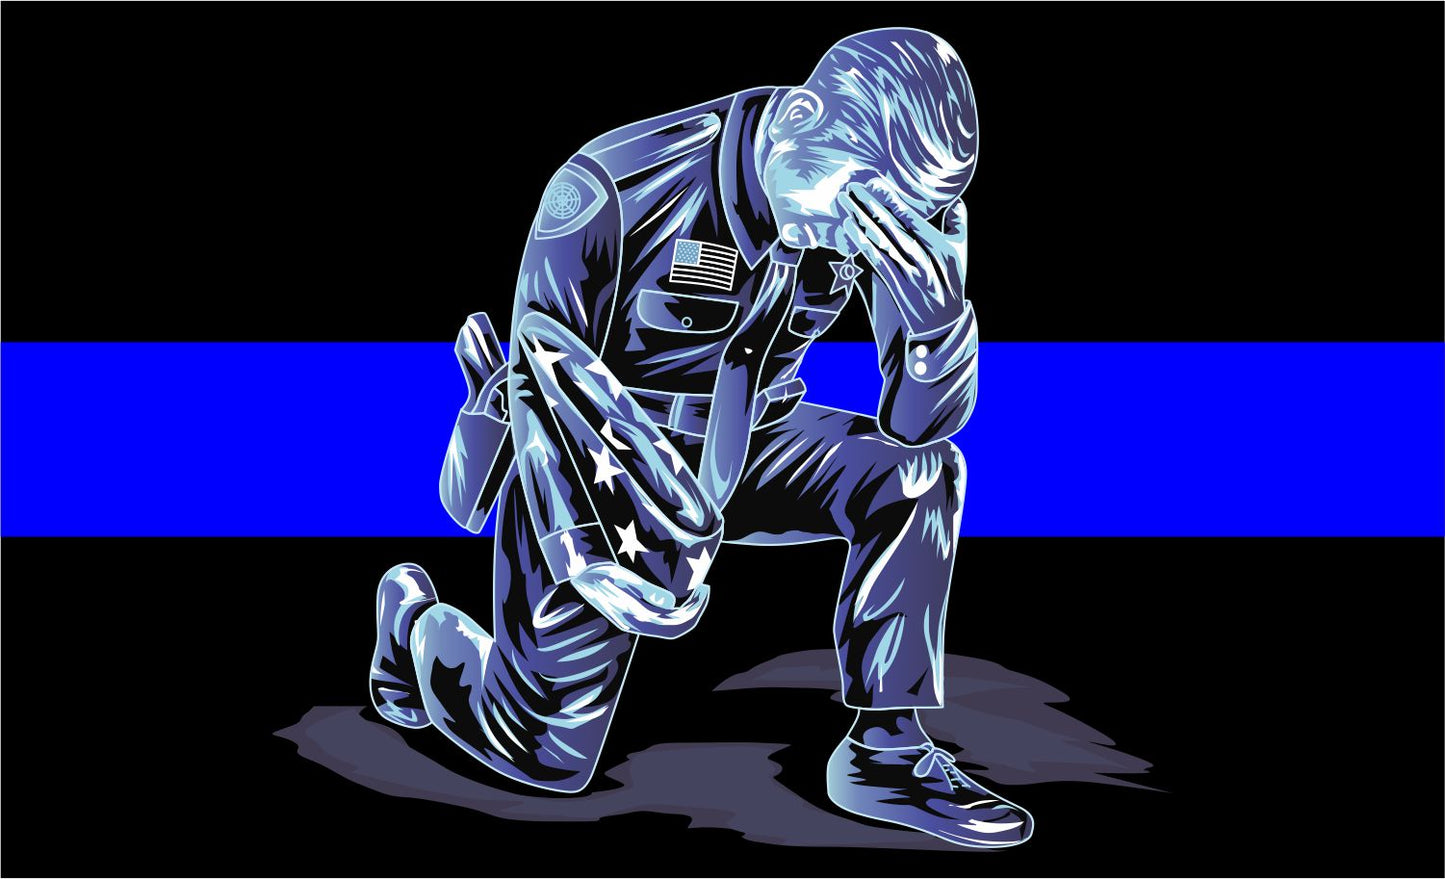 Kneeling Police Officer Down Blue Line Decal - Powercall Sirens LLC